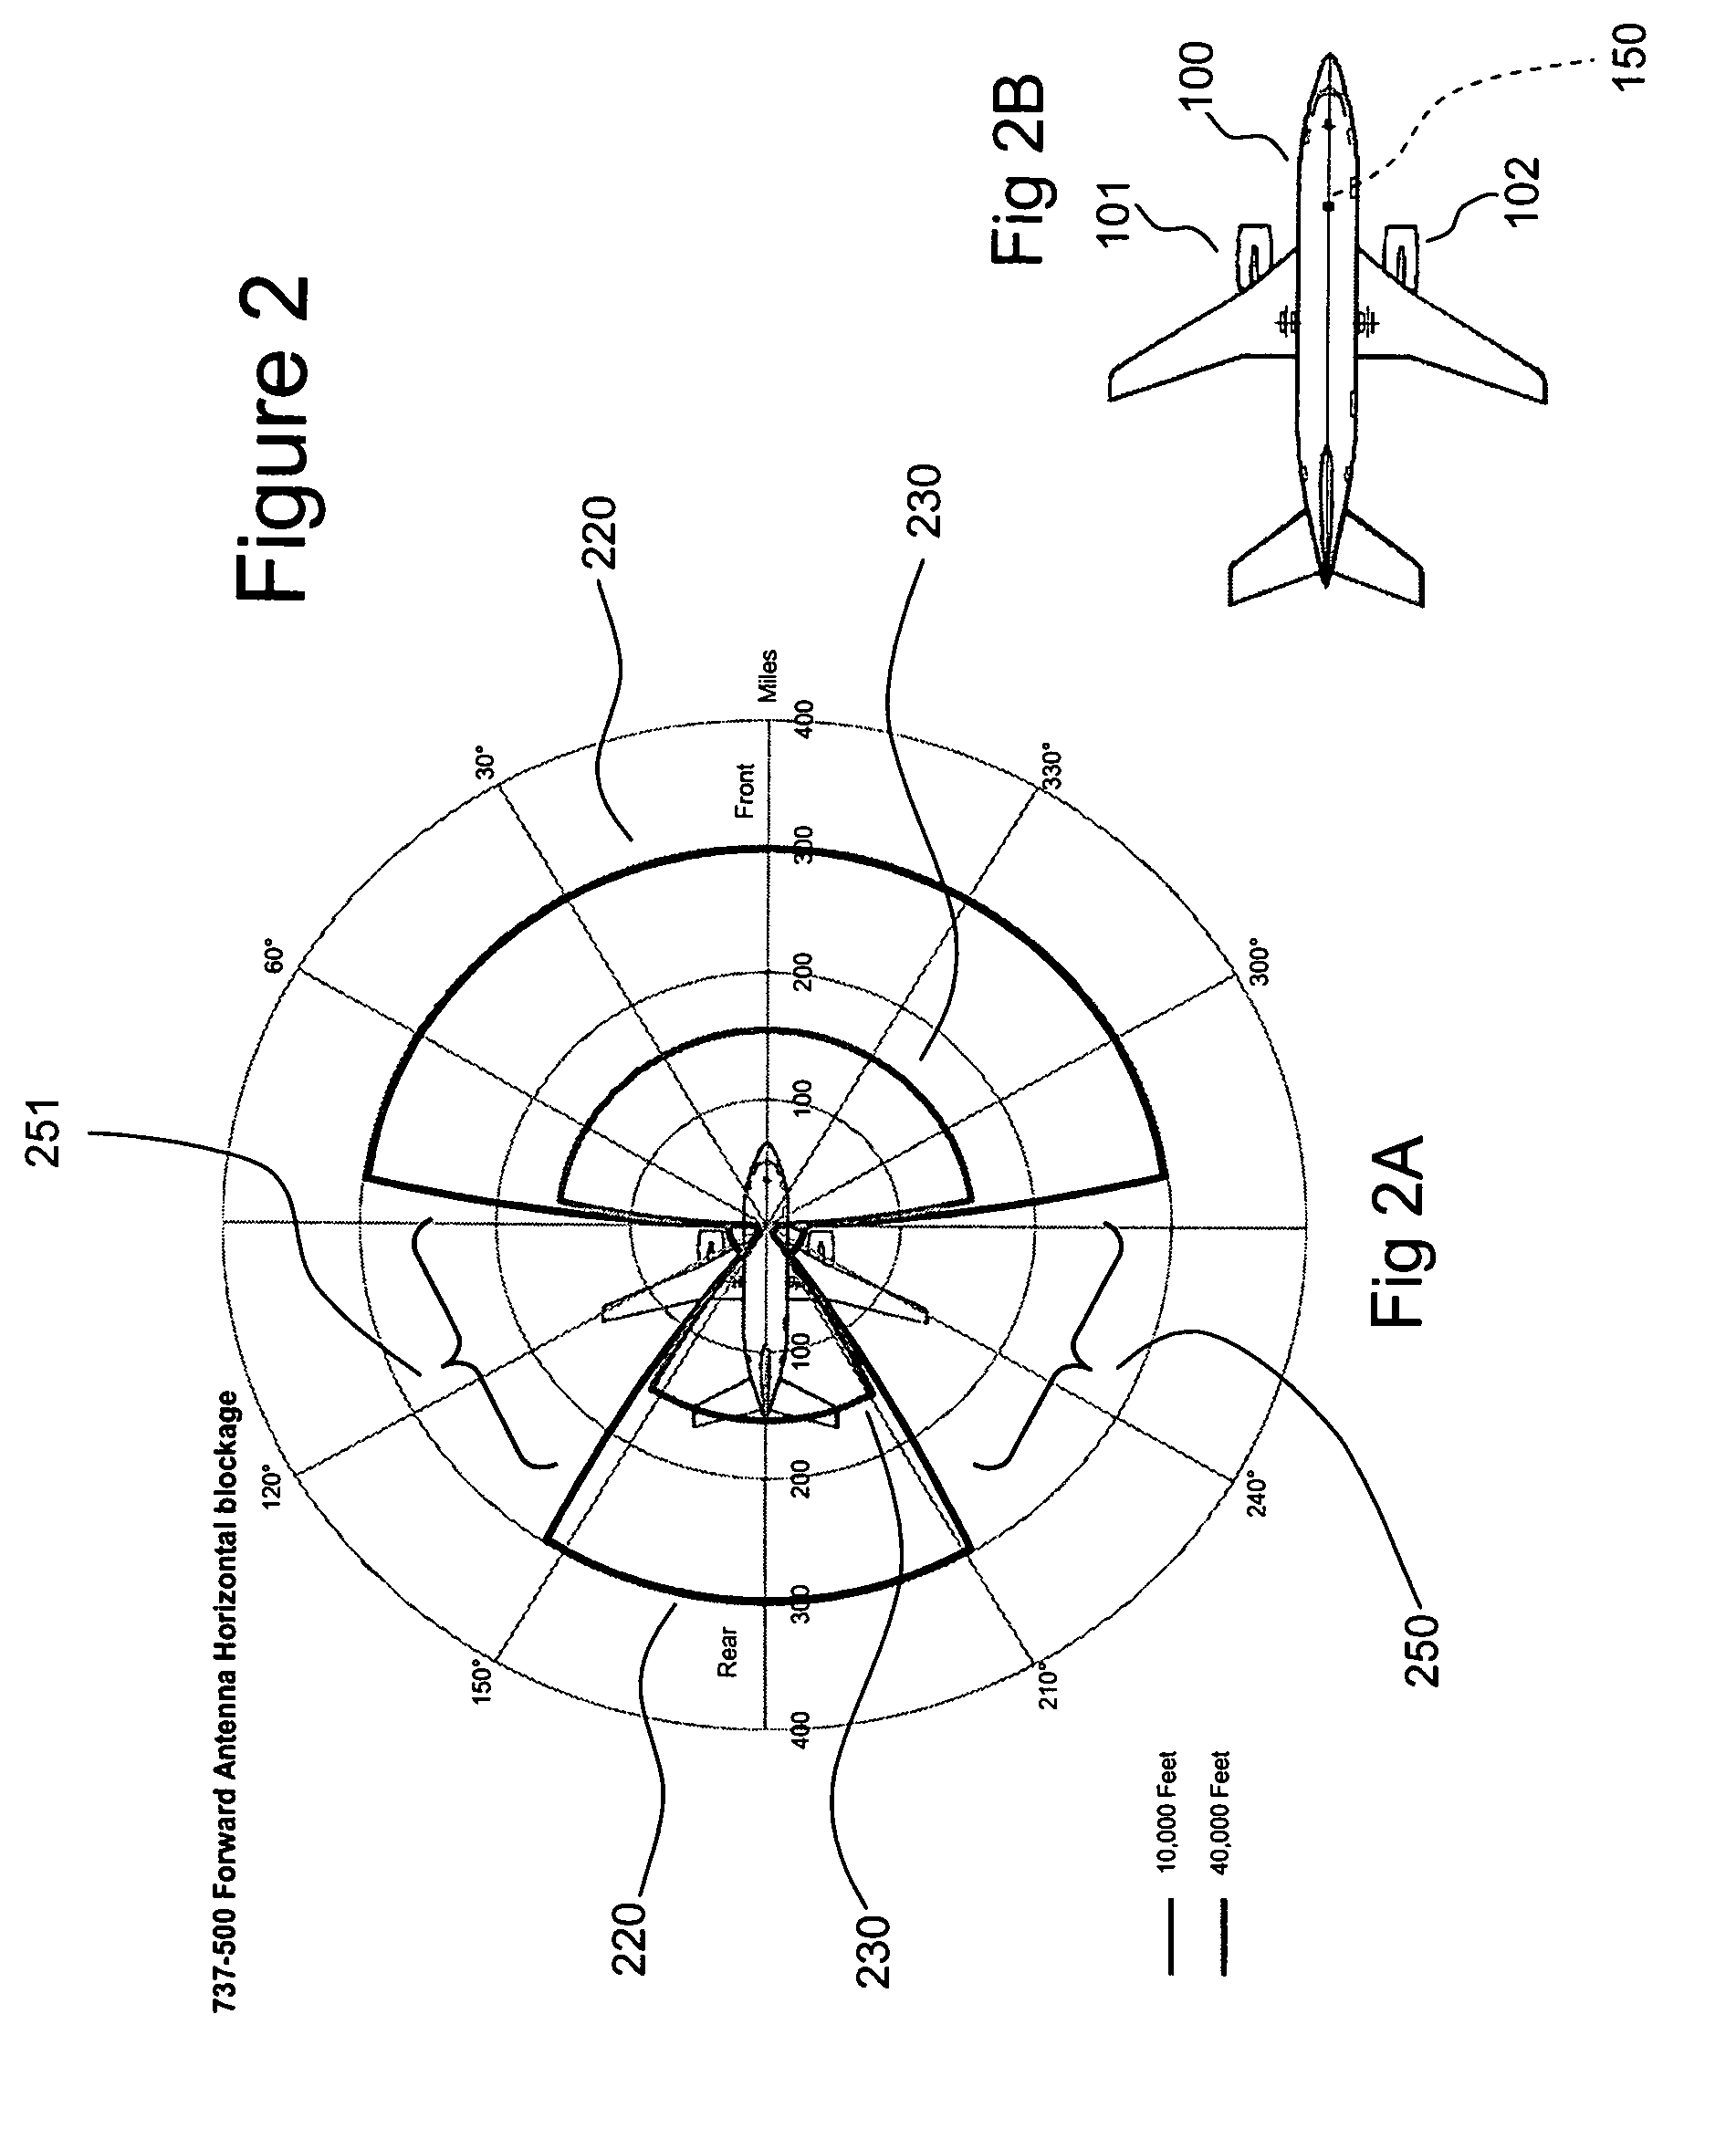 Multi-link aircraft cellular system for simultaneous communication with multiple terrestrial cell sites